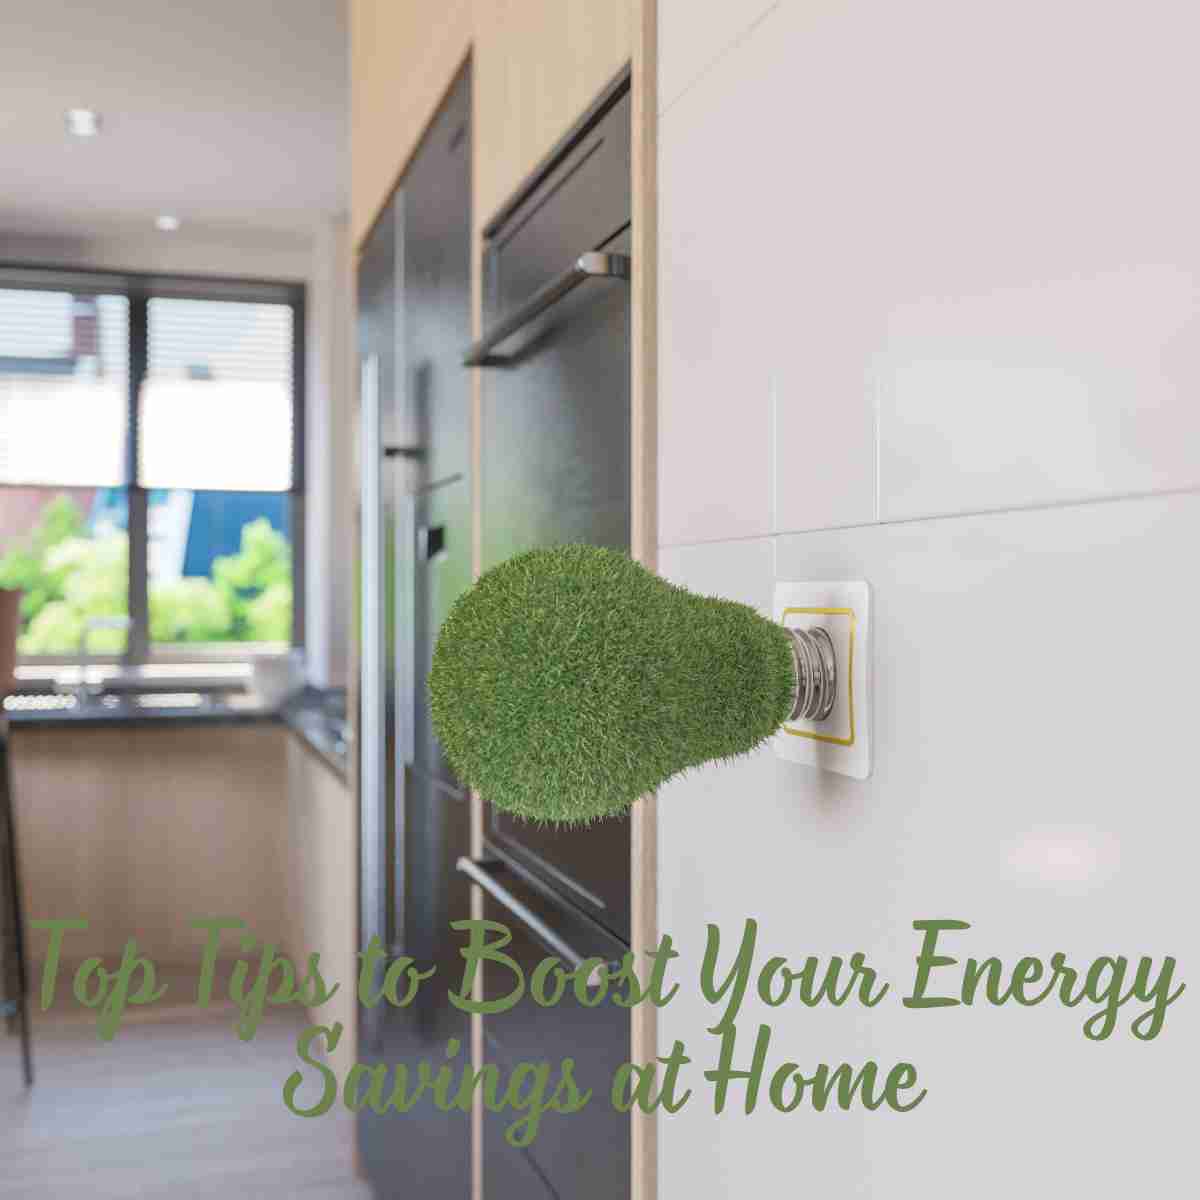 Top Tips to Boost Your Energy Savings at Home